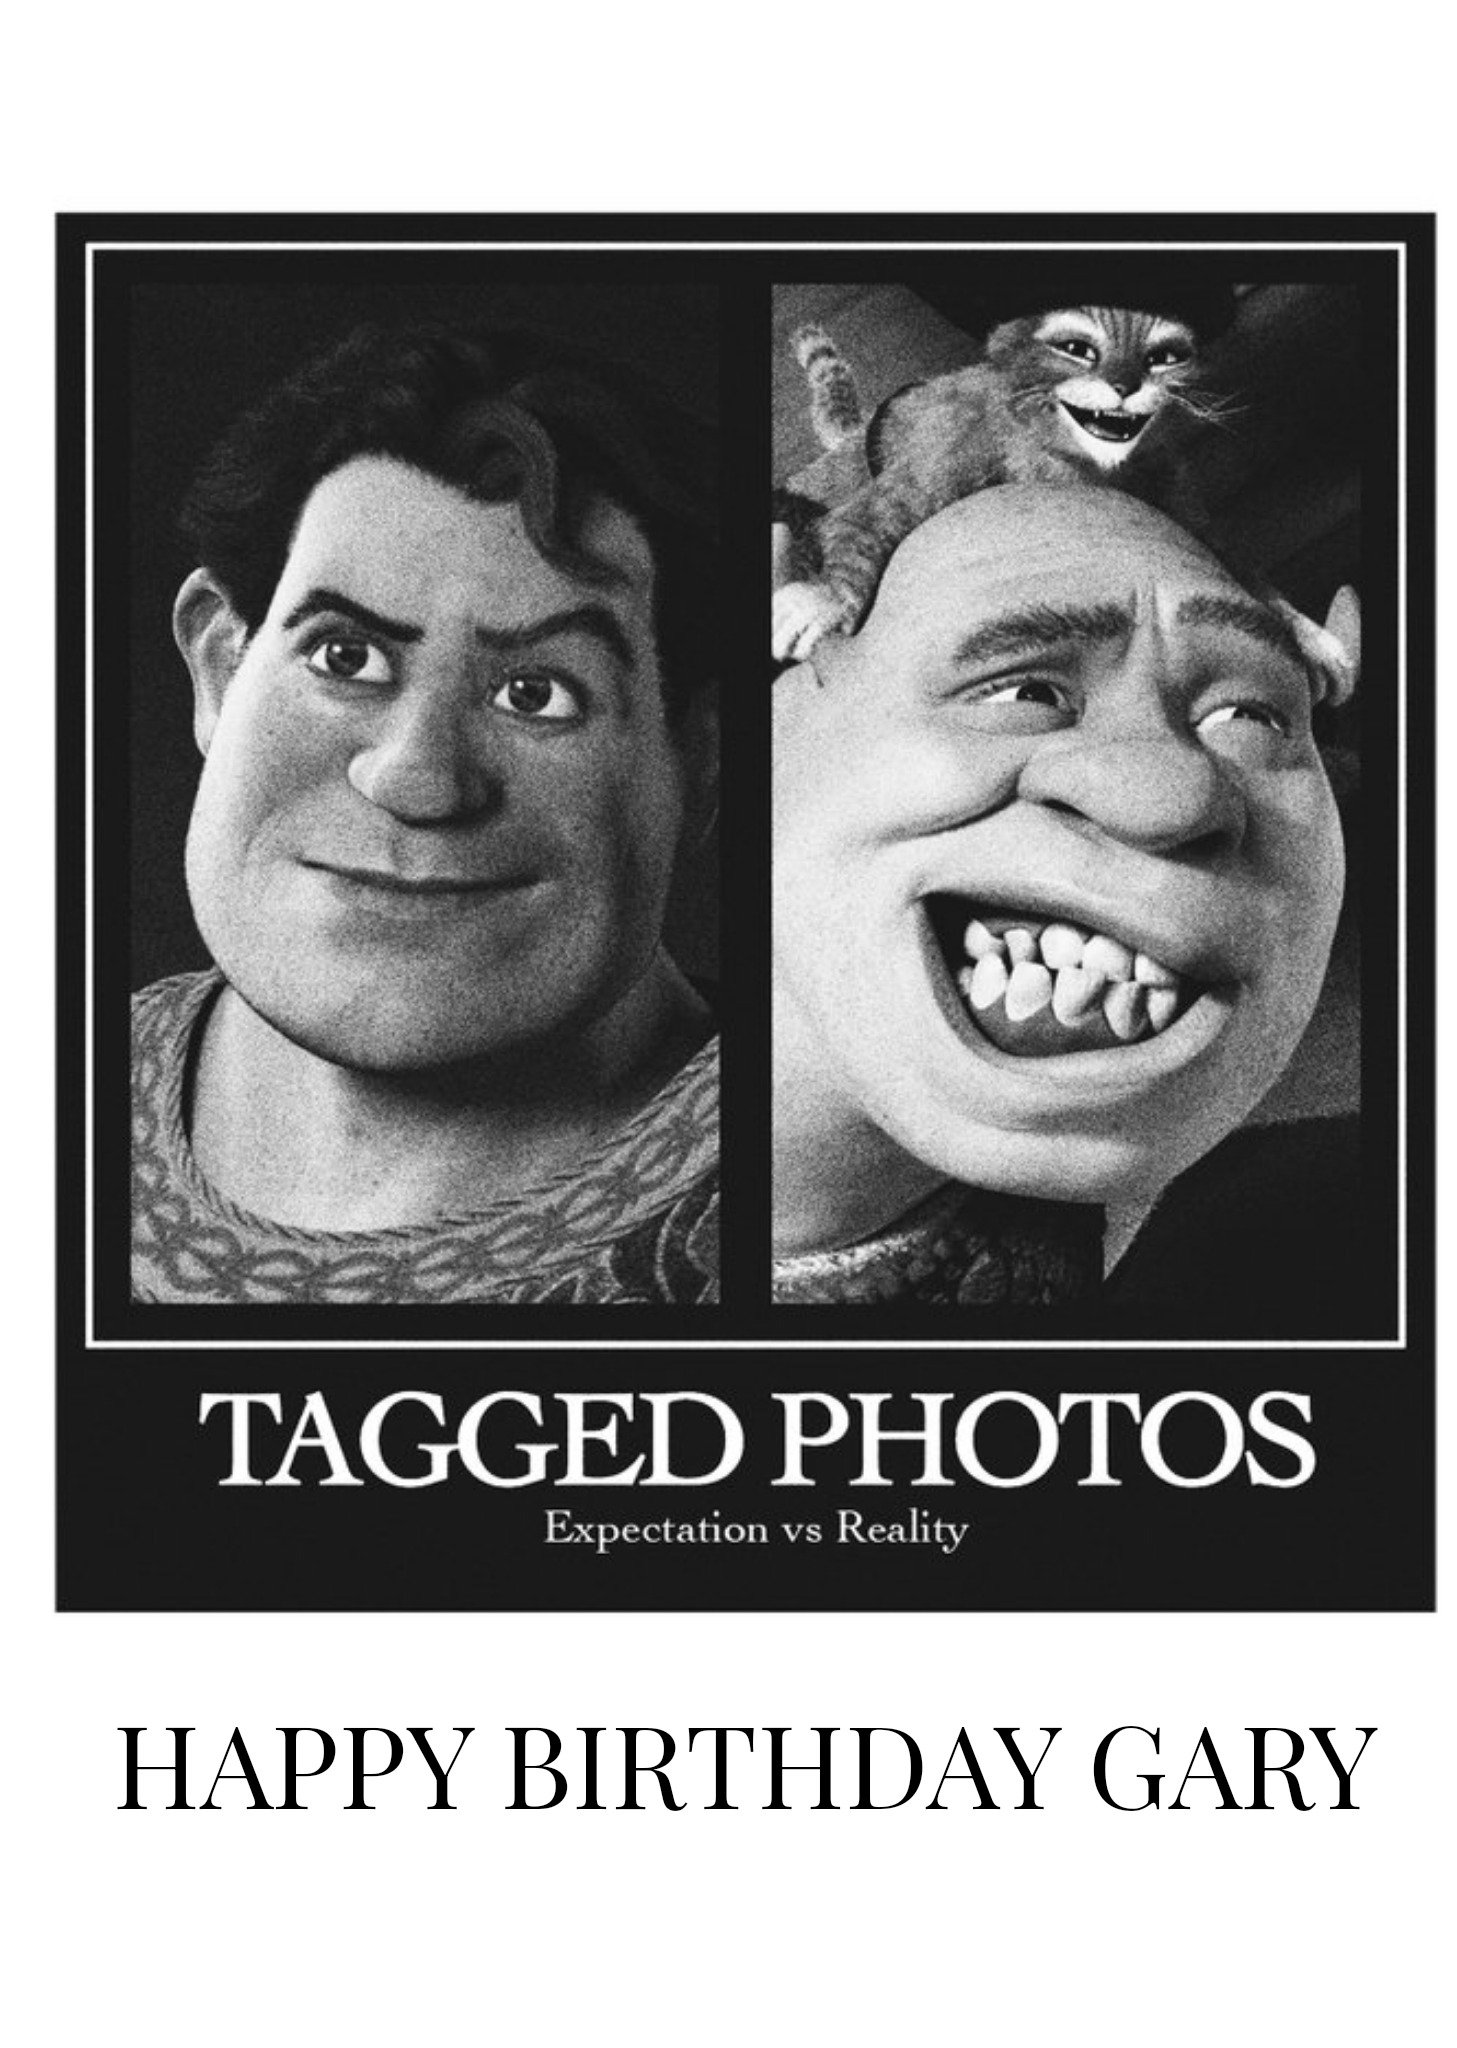 Moonpig Funny Black And White Images Of Shrek Tagged Photos Birthday Card, Large